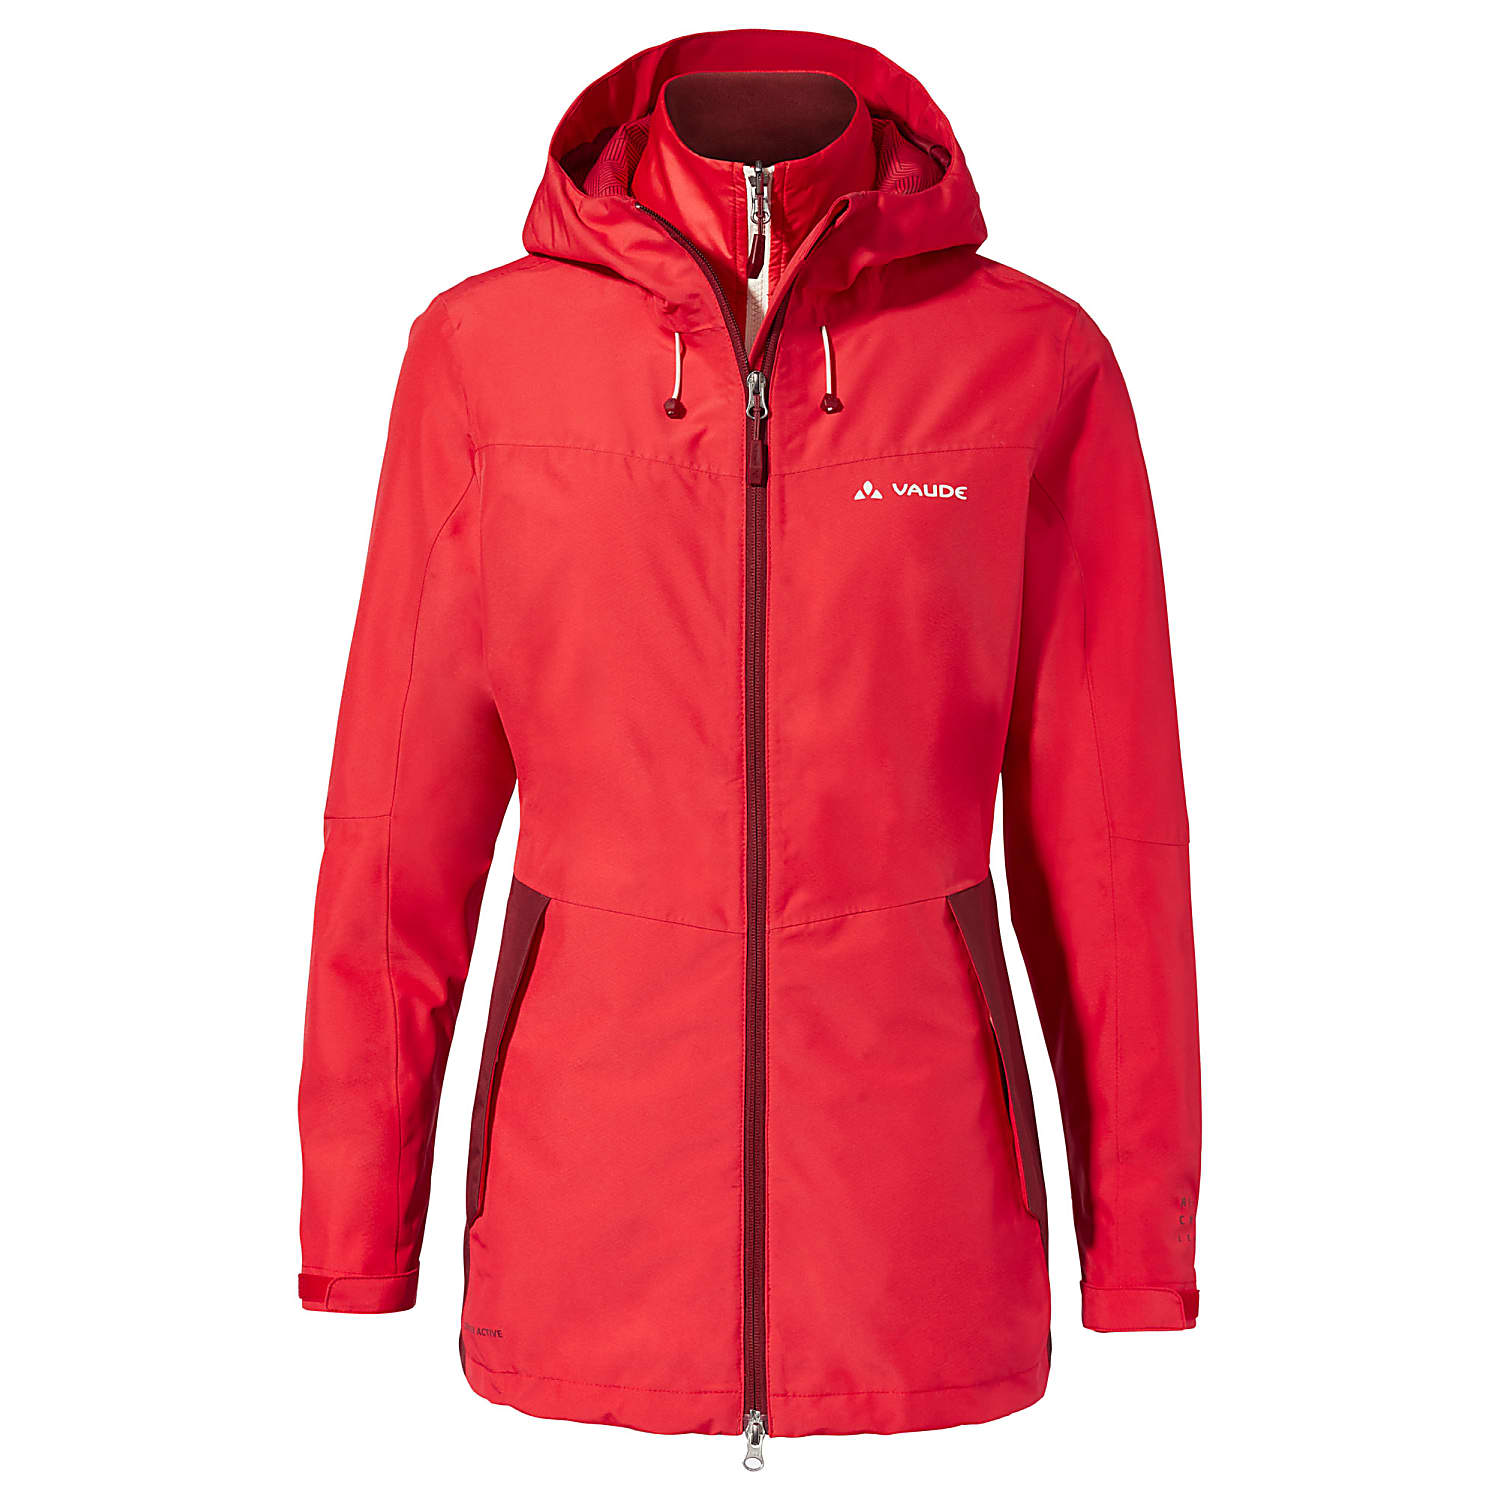 Vaude WOMENS VALSORDA 3IN1 JACKET, Flame - Fast and cheap shipping